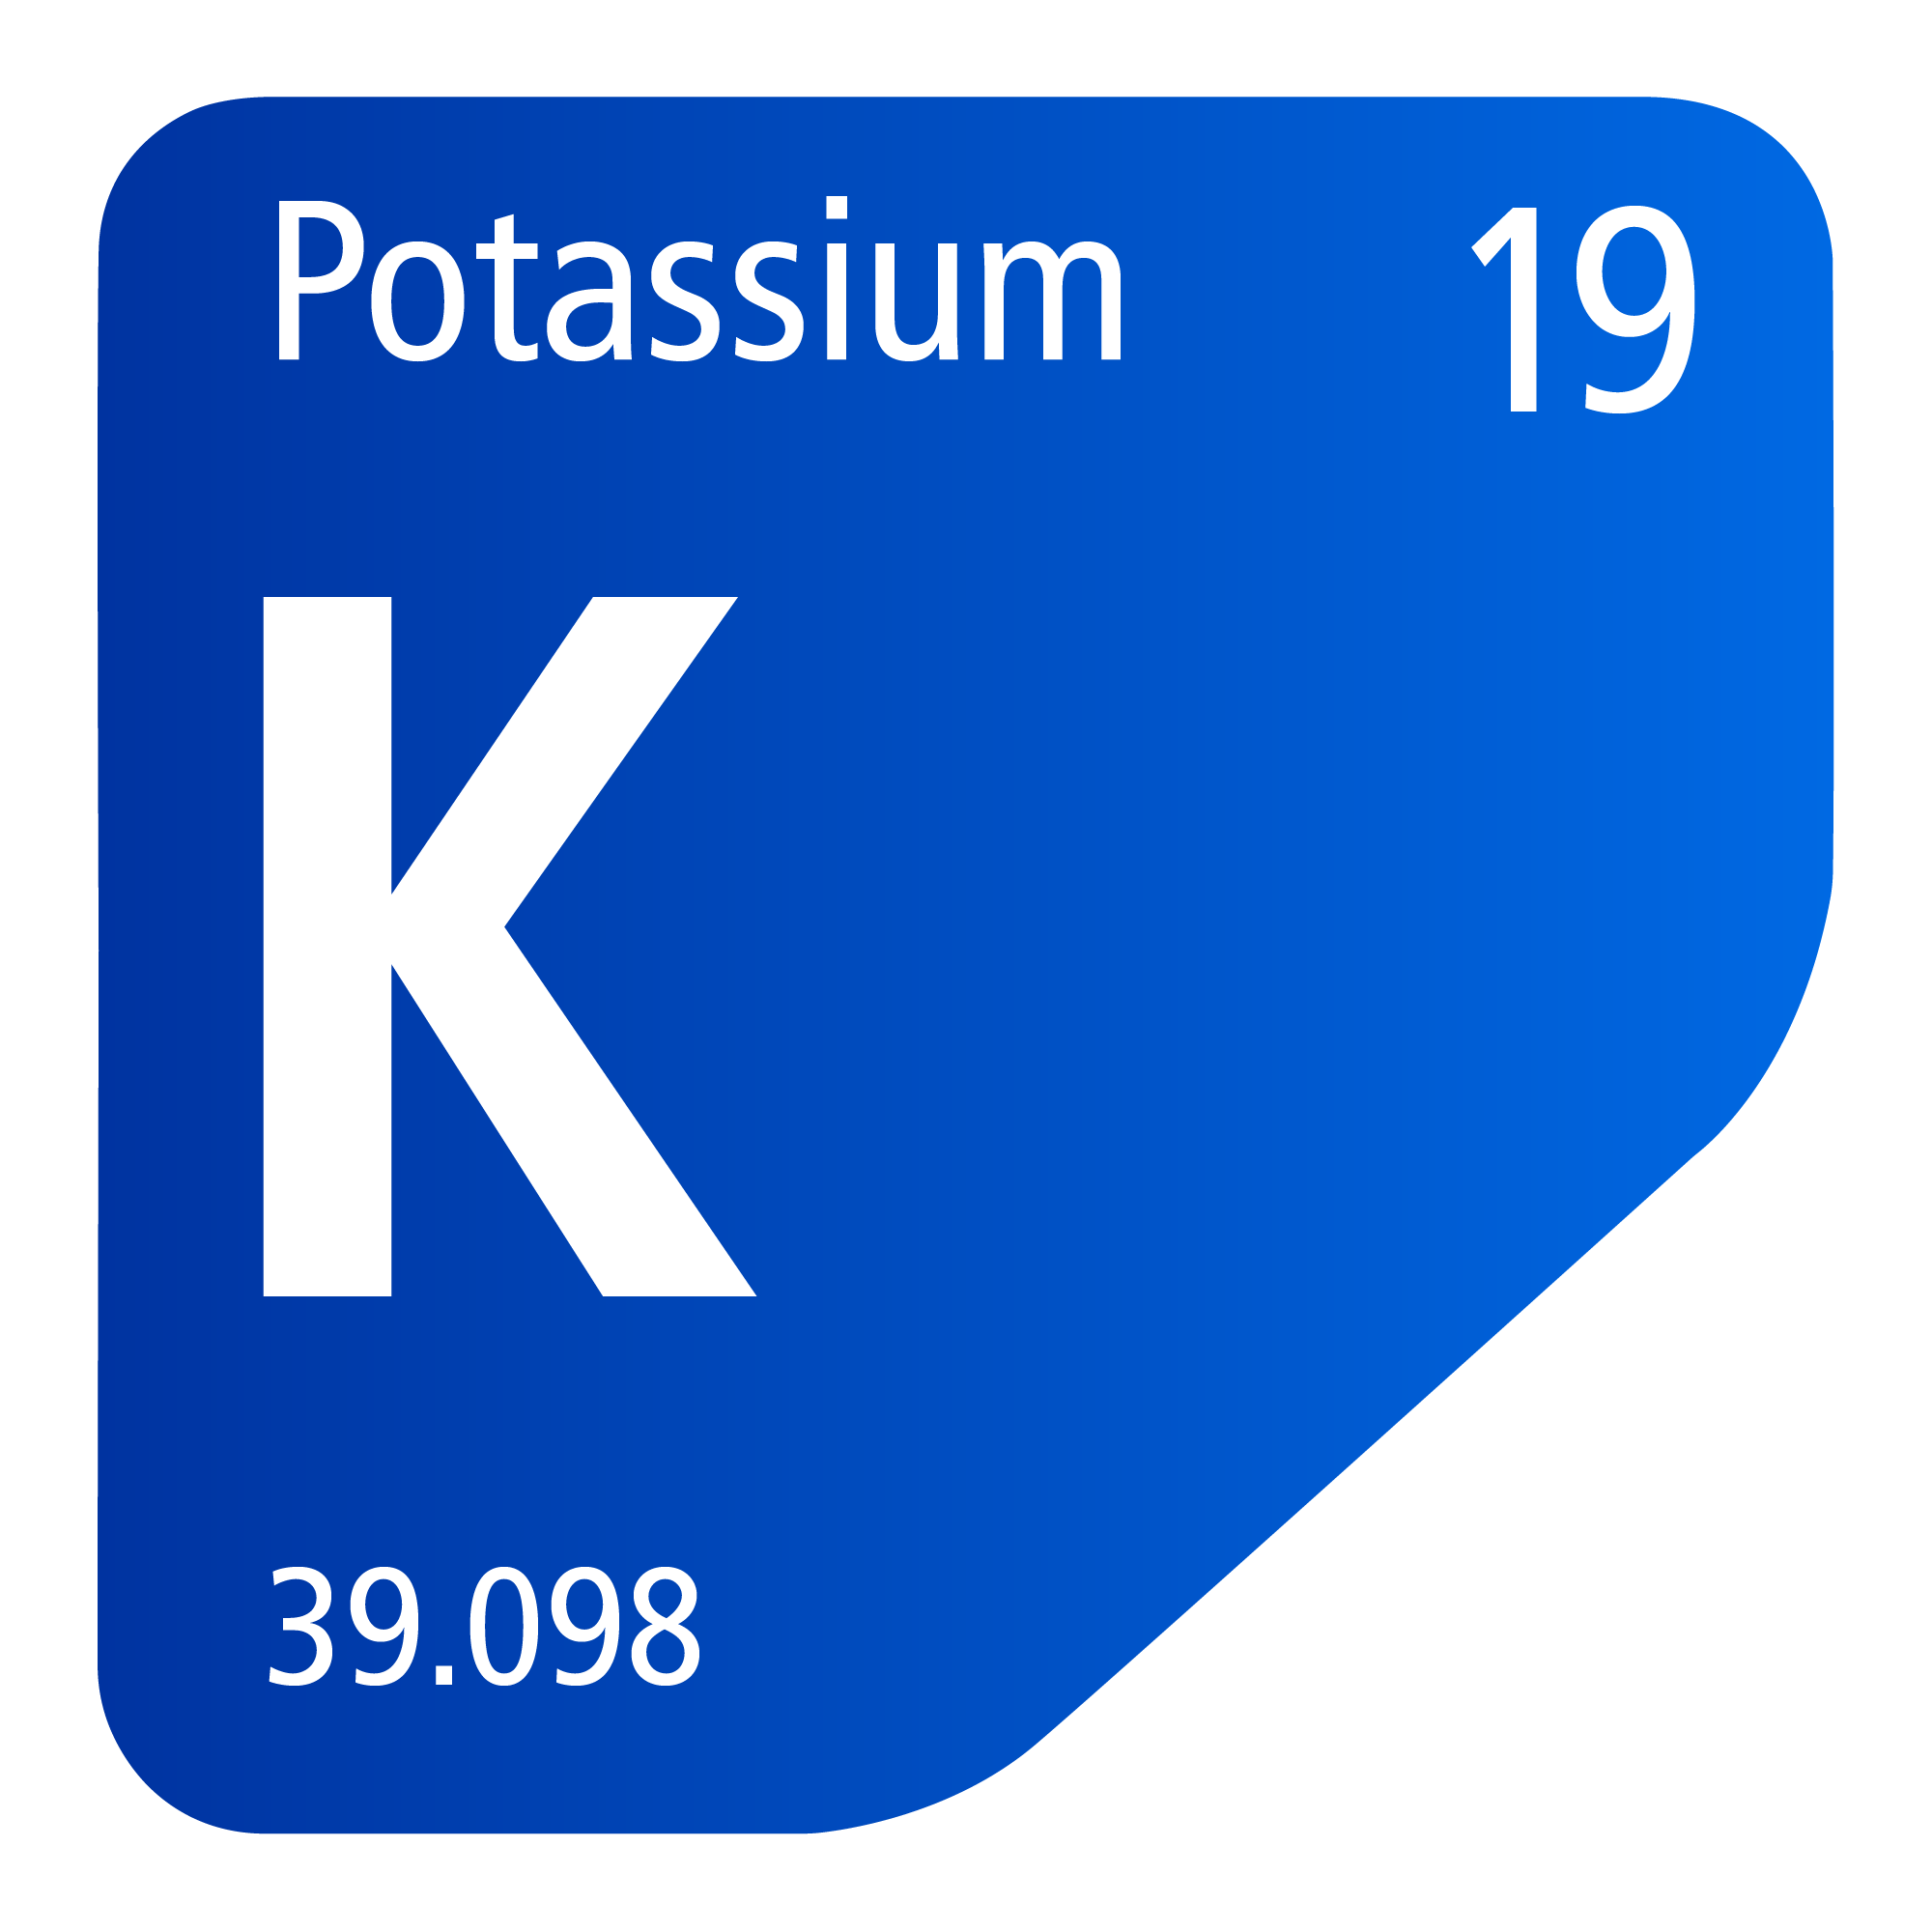 List of Behansar products in Potassium category